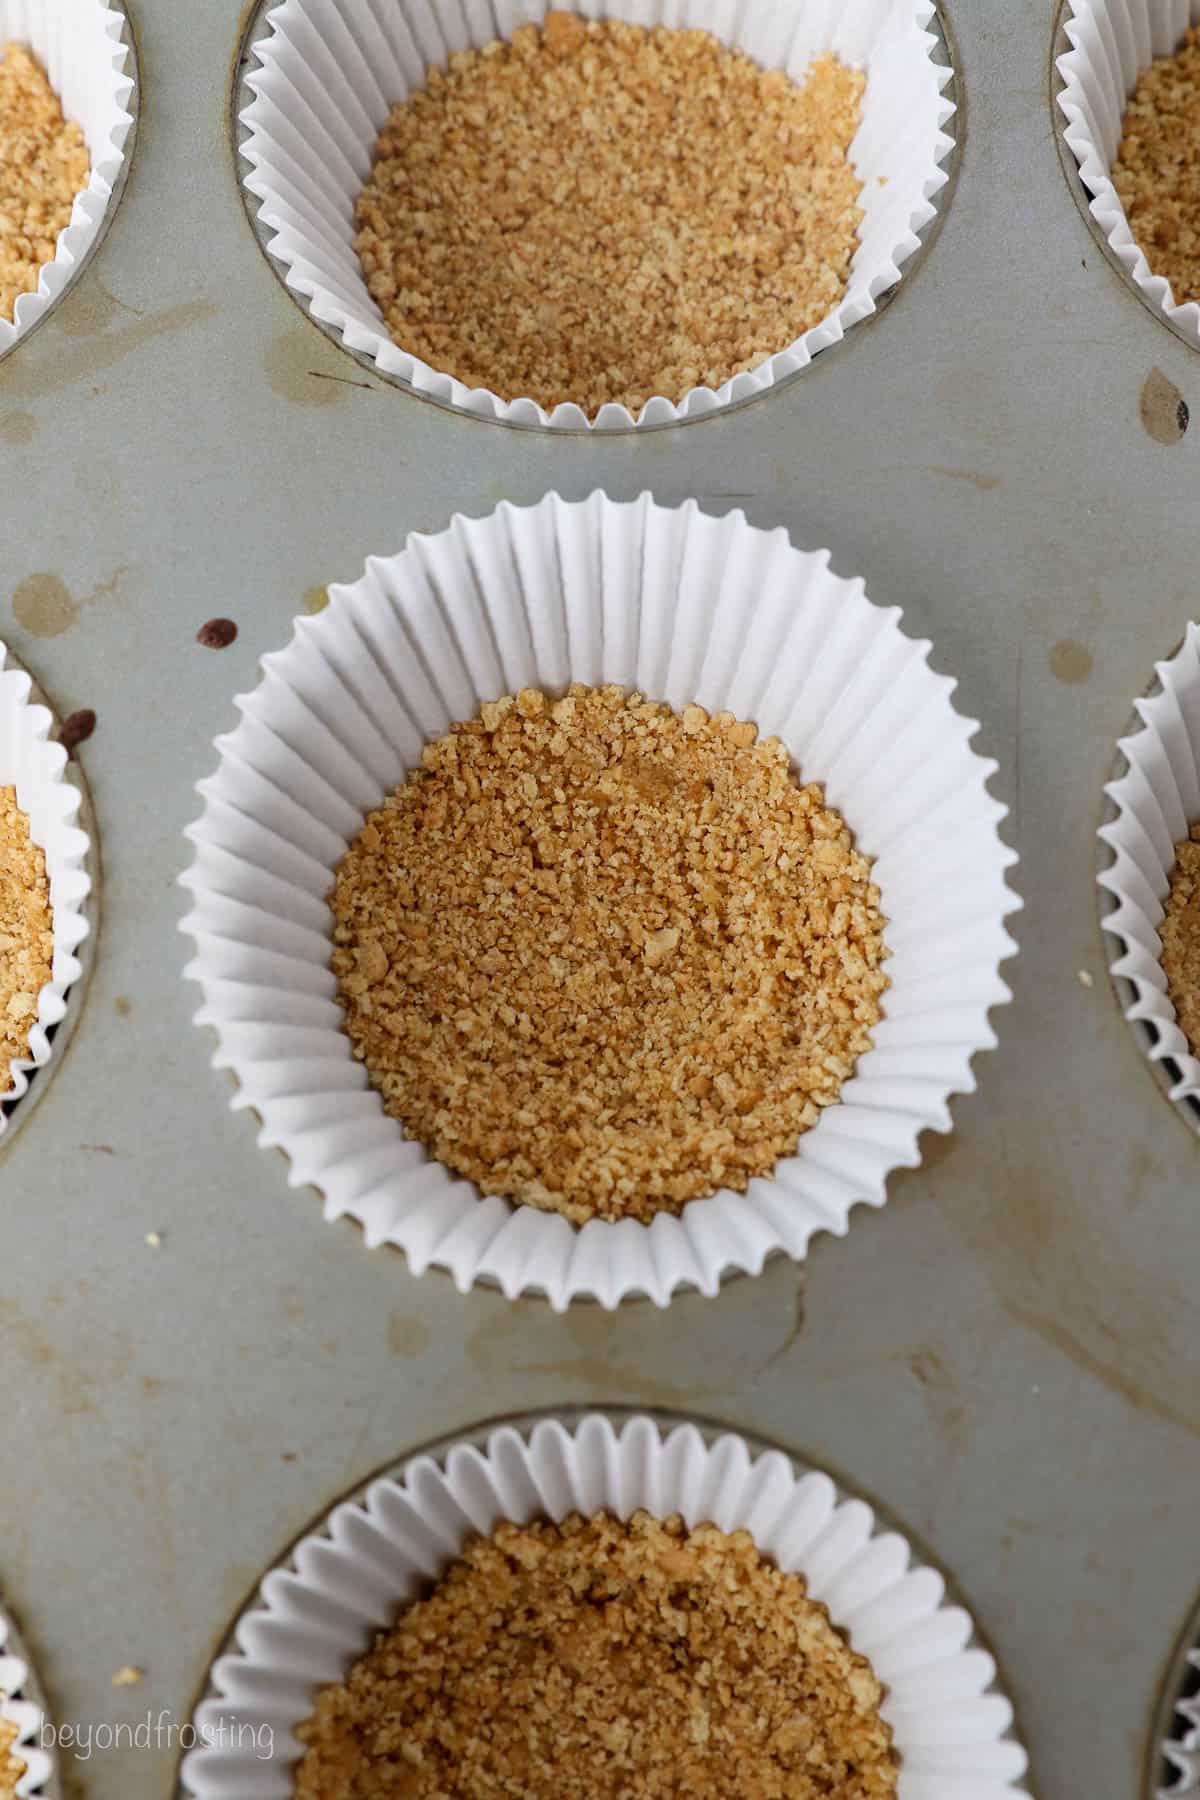 Overhead close-up view of cupcake liners with a graham cracker crust.